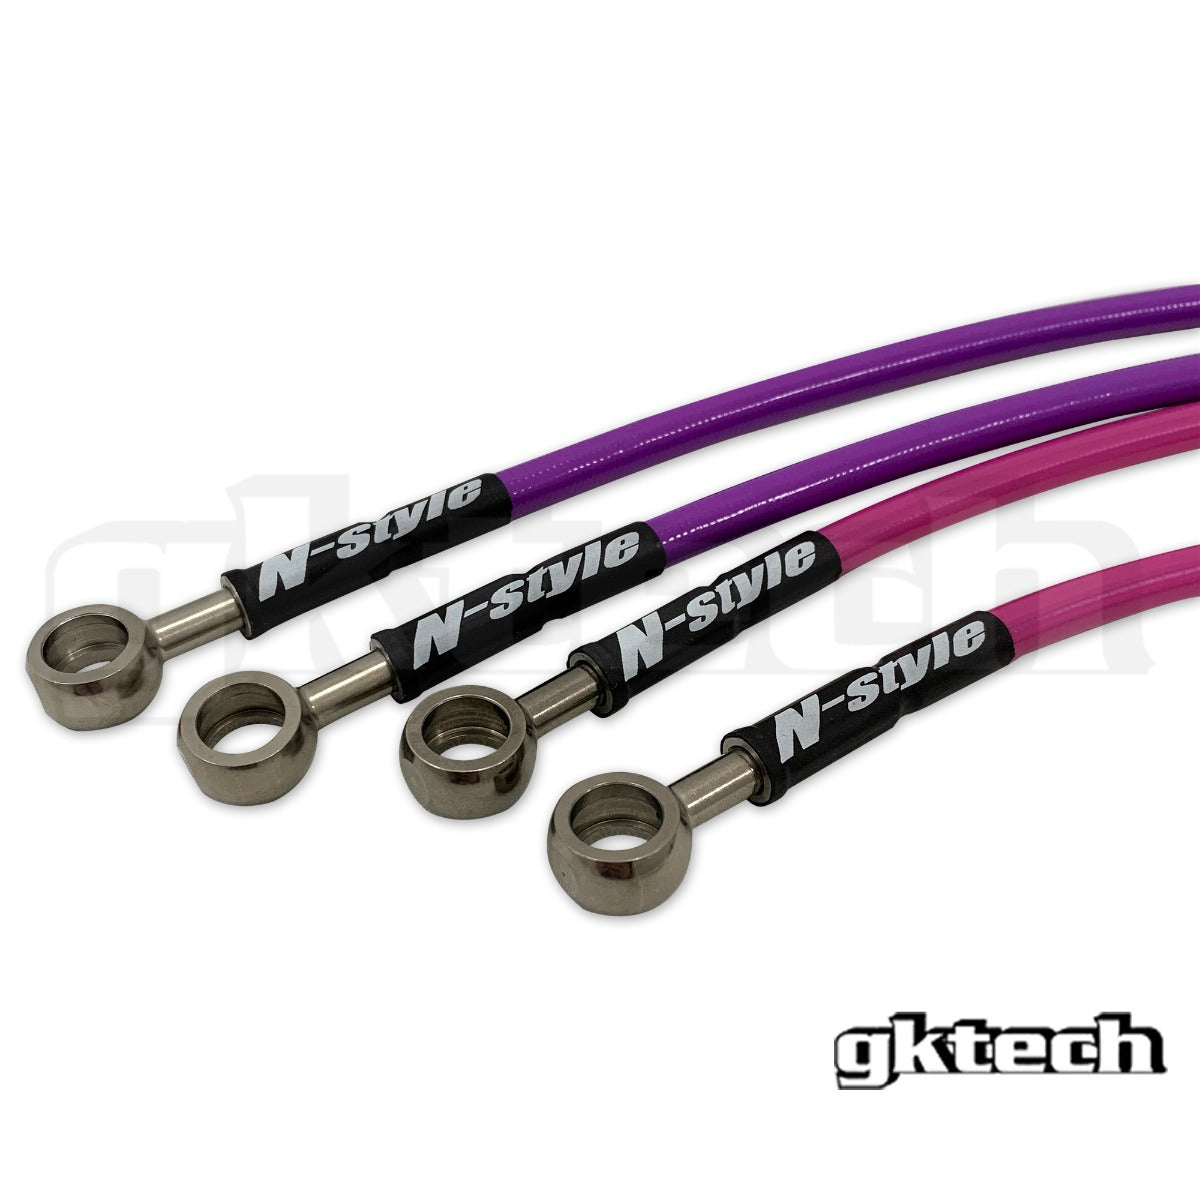 N-Style S14 240sx/S15 Silvia braided brake lines